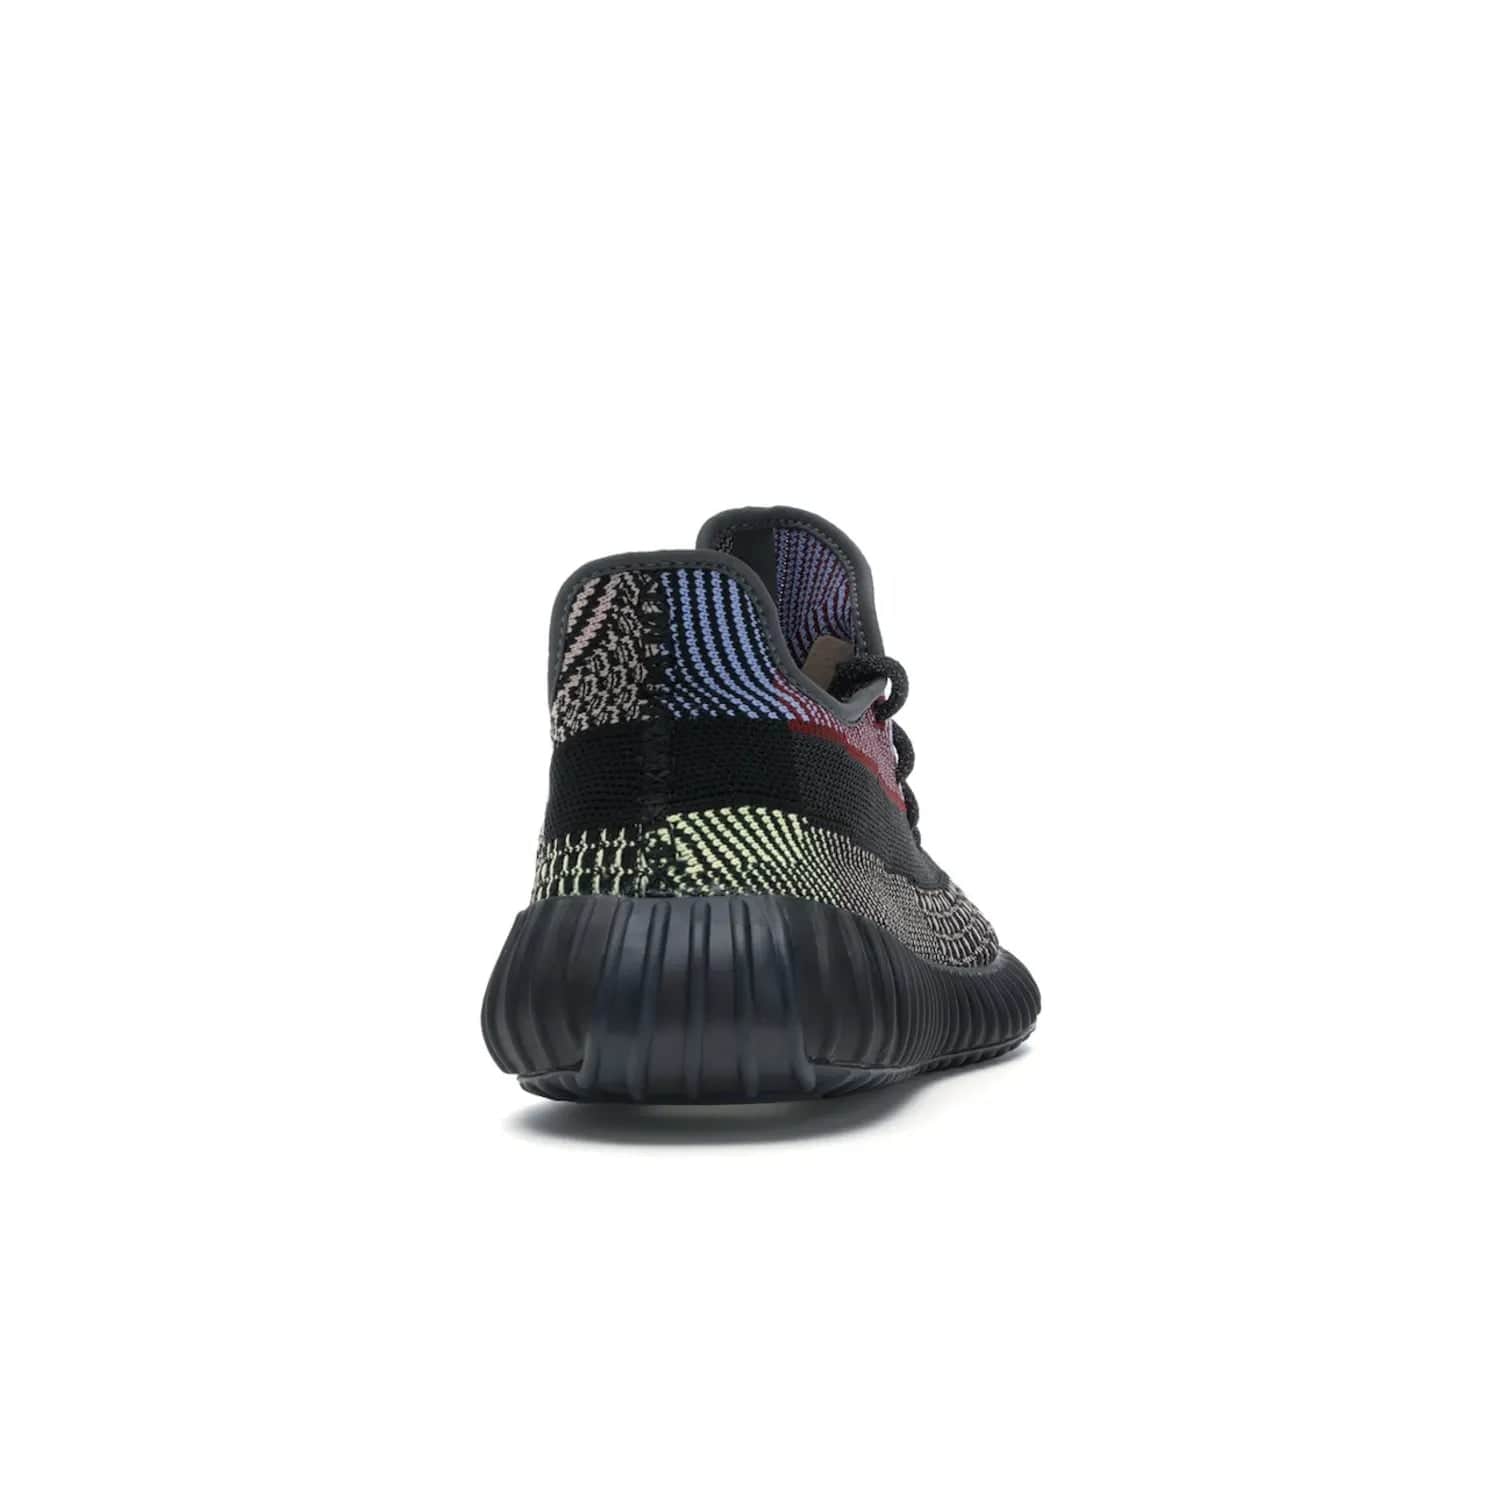 adidas Yeezy Boost 350 V2 Yecheil (Non-Reflective) - Image 29 - Only at www.BallersClubKickz.com - Make a statement with the eye-catching adidas Yeezy Boost 350 V2 Yecheil Non-Reflective. Featuring a spectrum of colorful hues, black upper, Boost cushioning, and black side stripe, the sneaker brings a luxe yet playful finish to any outfit.